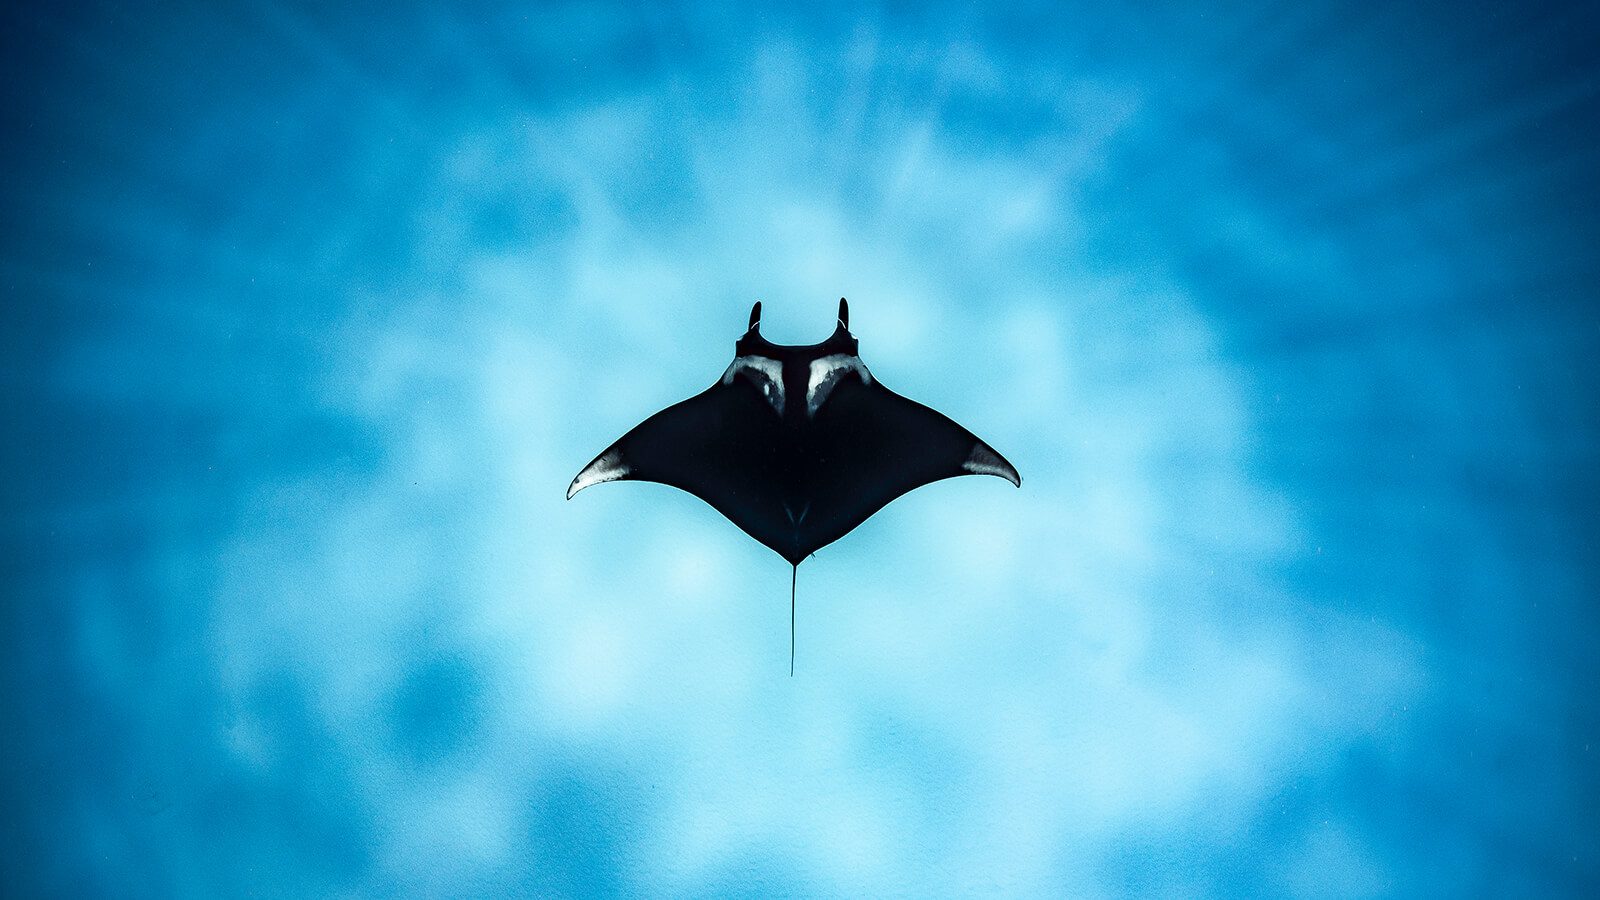 A manta ray cruises above a sandy seabed off Coral Bay, Western Australia. - by Brooke Pyke, in Western Australia